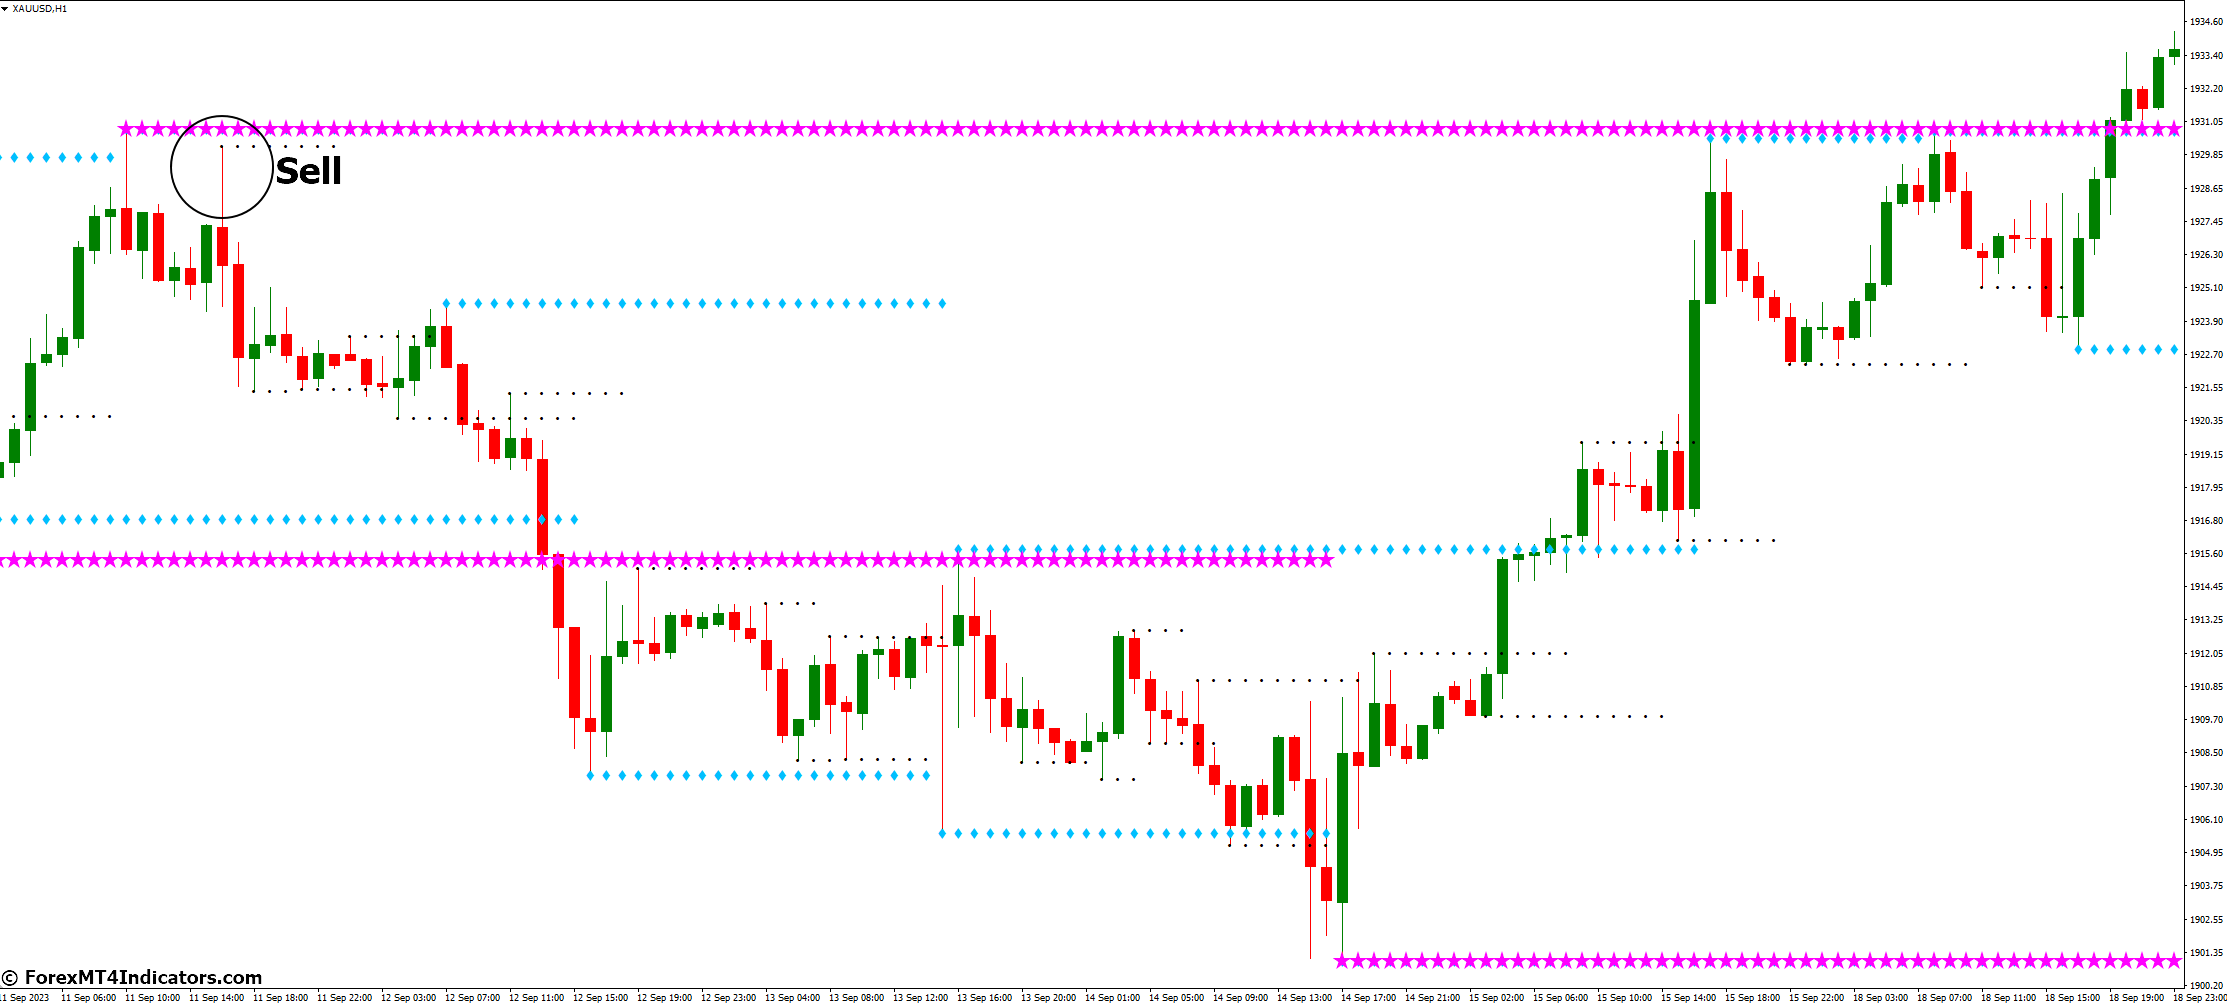 How to Trade with Kg Support and Resistance MT4 Indicator - Sell Entry